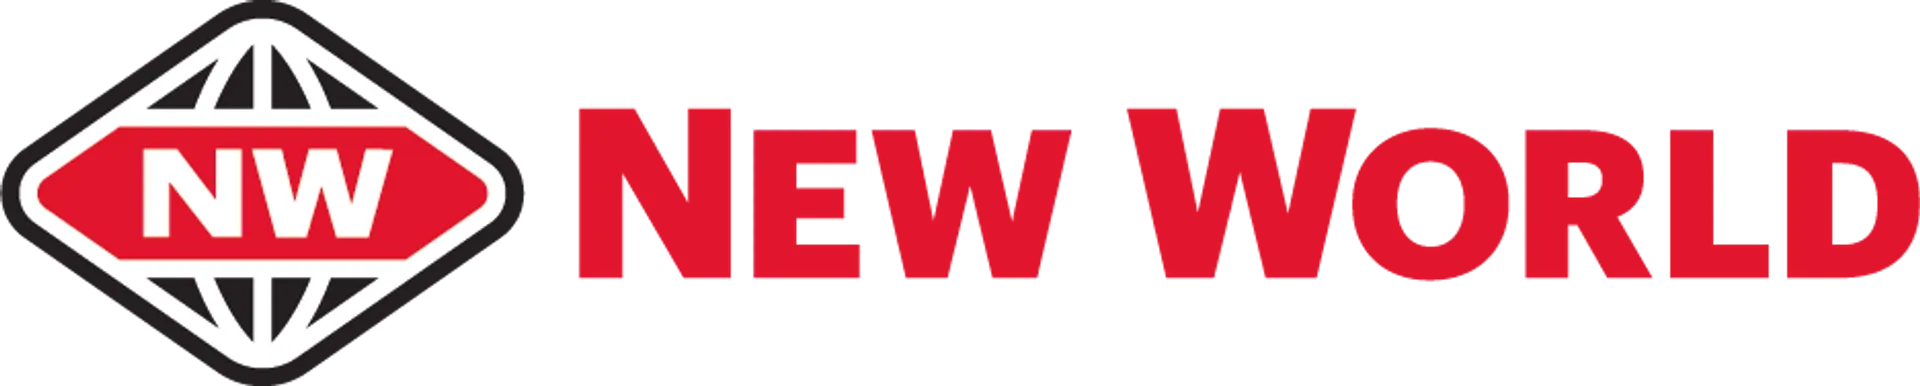 NEW WORLD logo. Current weekly ad